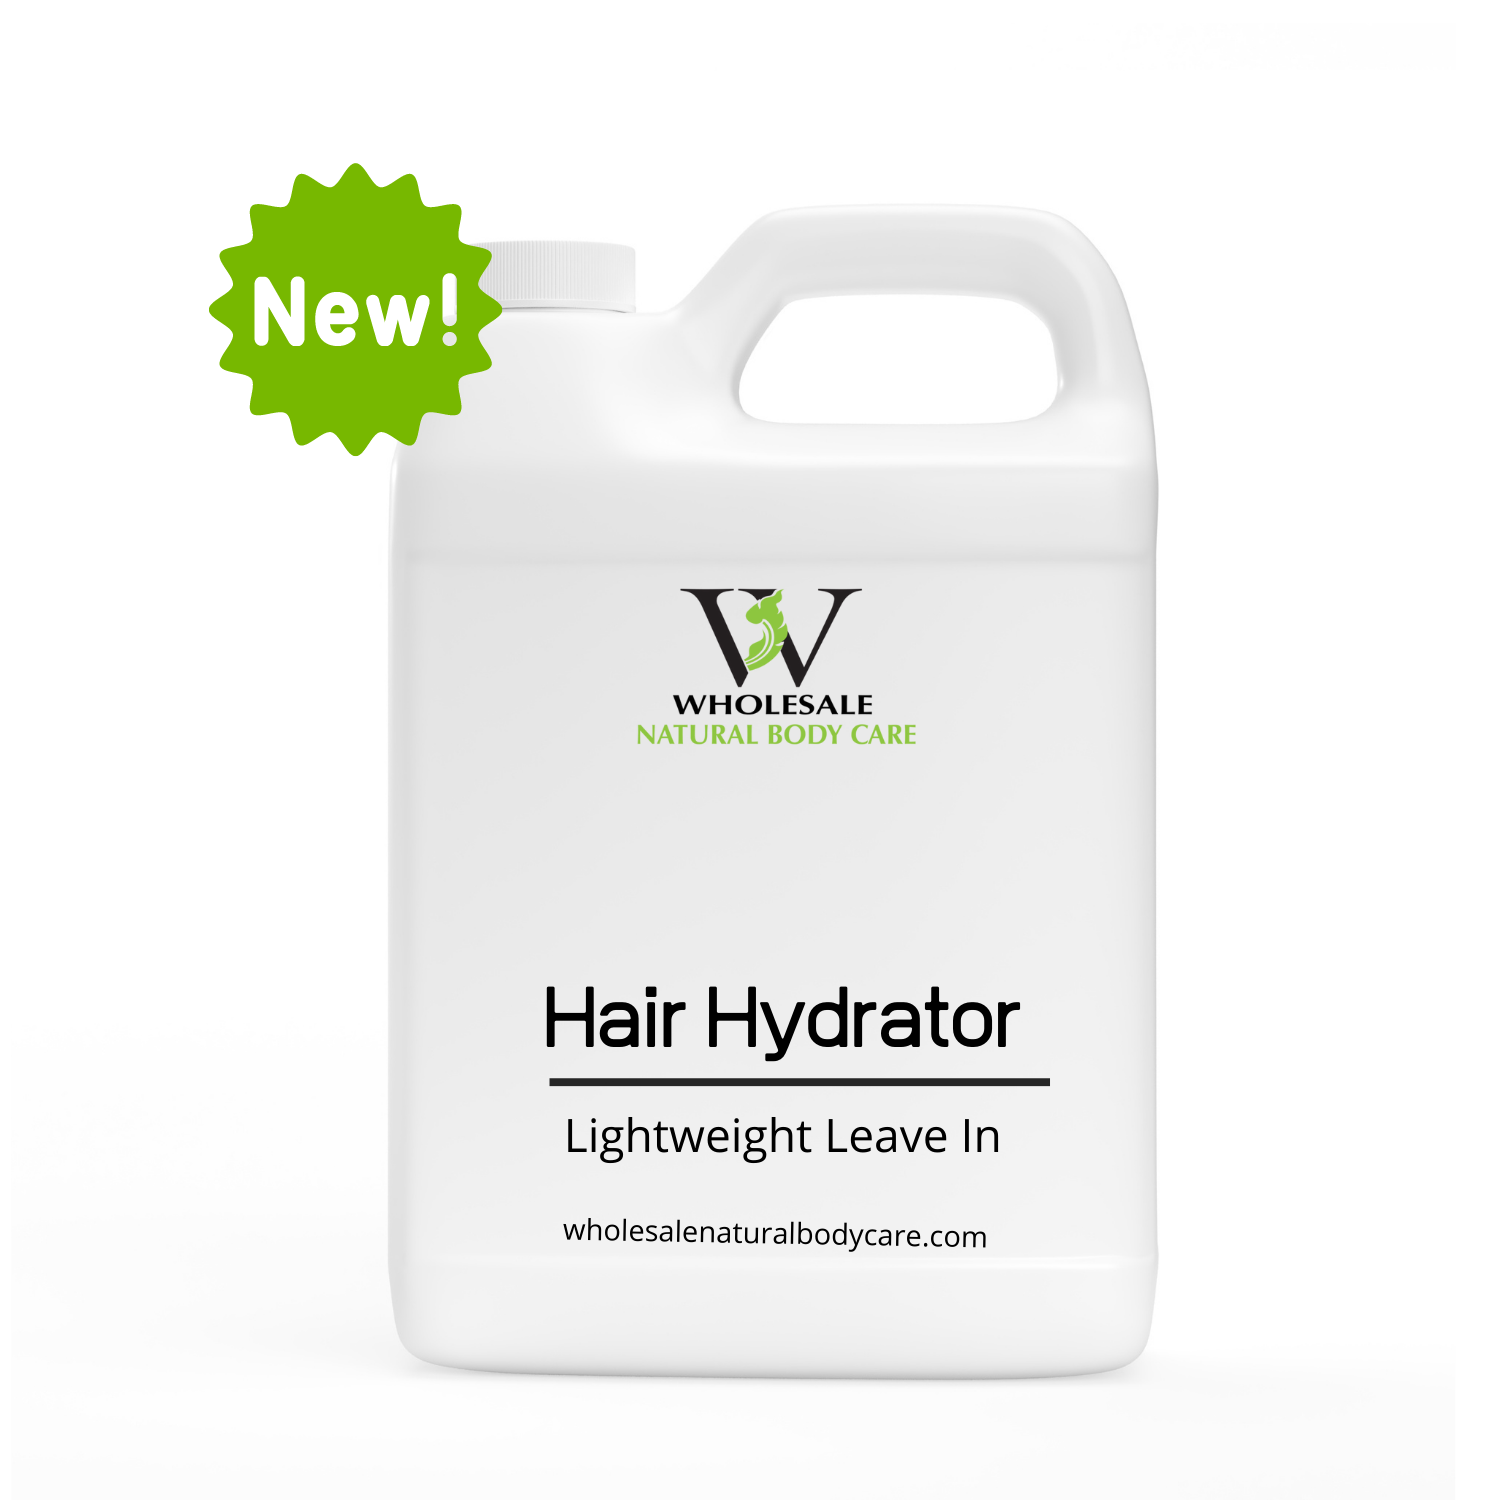 Lightweight leave-in hydrator for your hair, long-lasting hydration without weighing your hair down. Sulfates, parabens, and other harsh ingredients that is made with natural ingredients that can help nourish your hair and leave it feeling softer and smoother